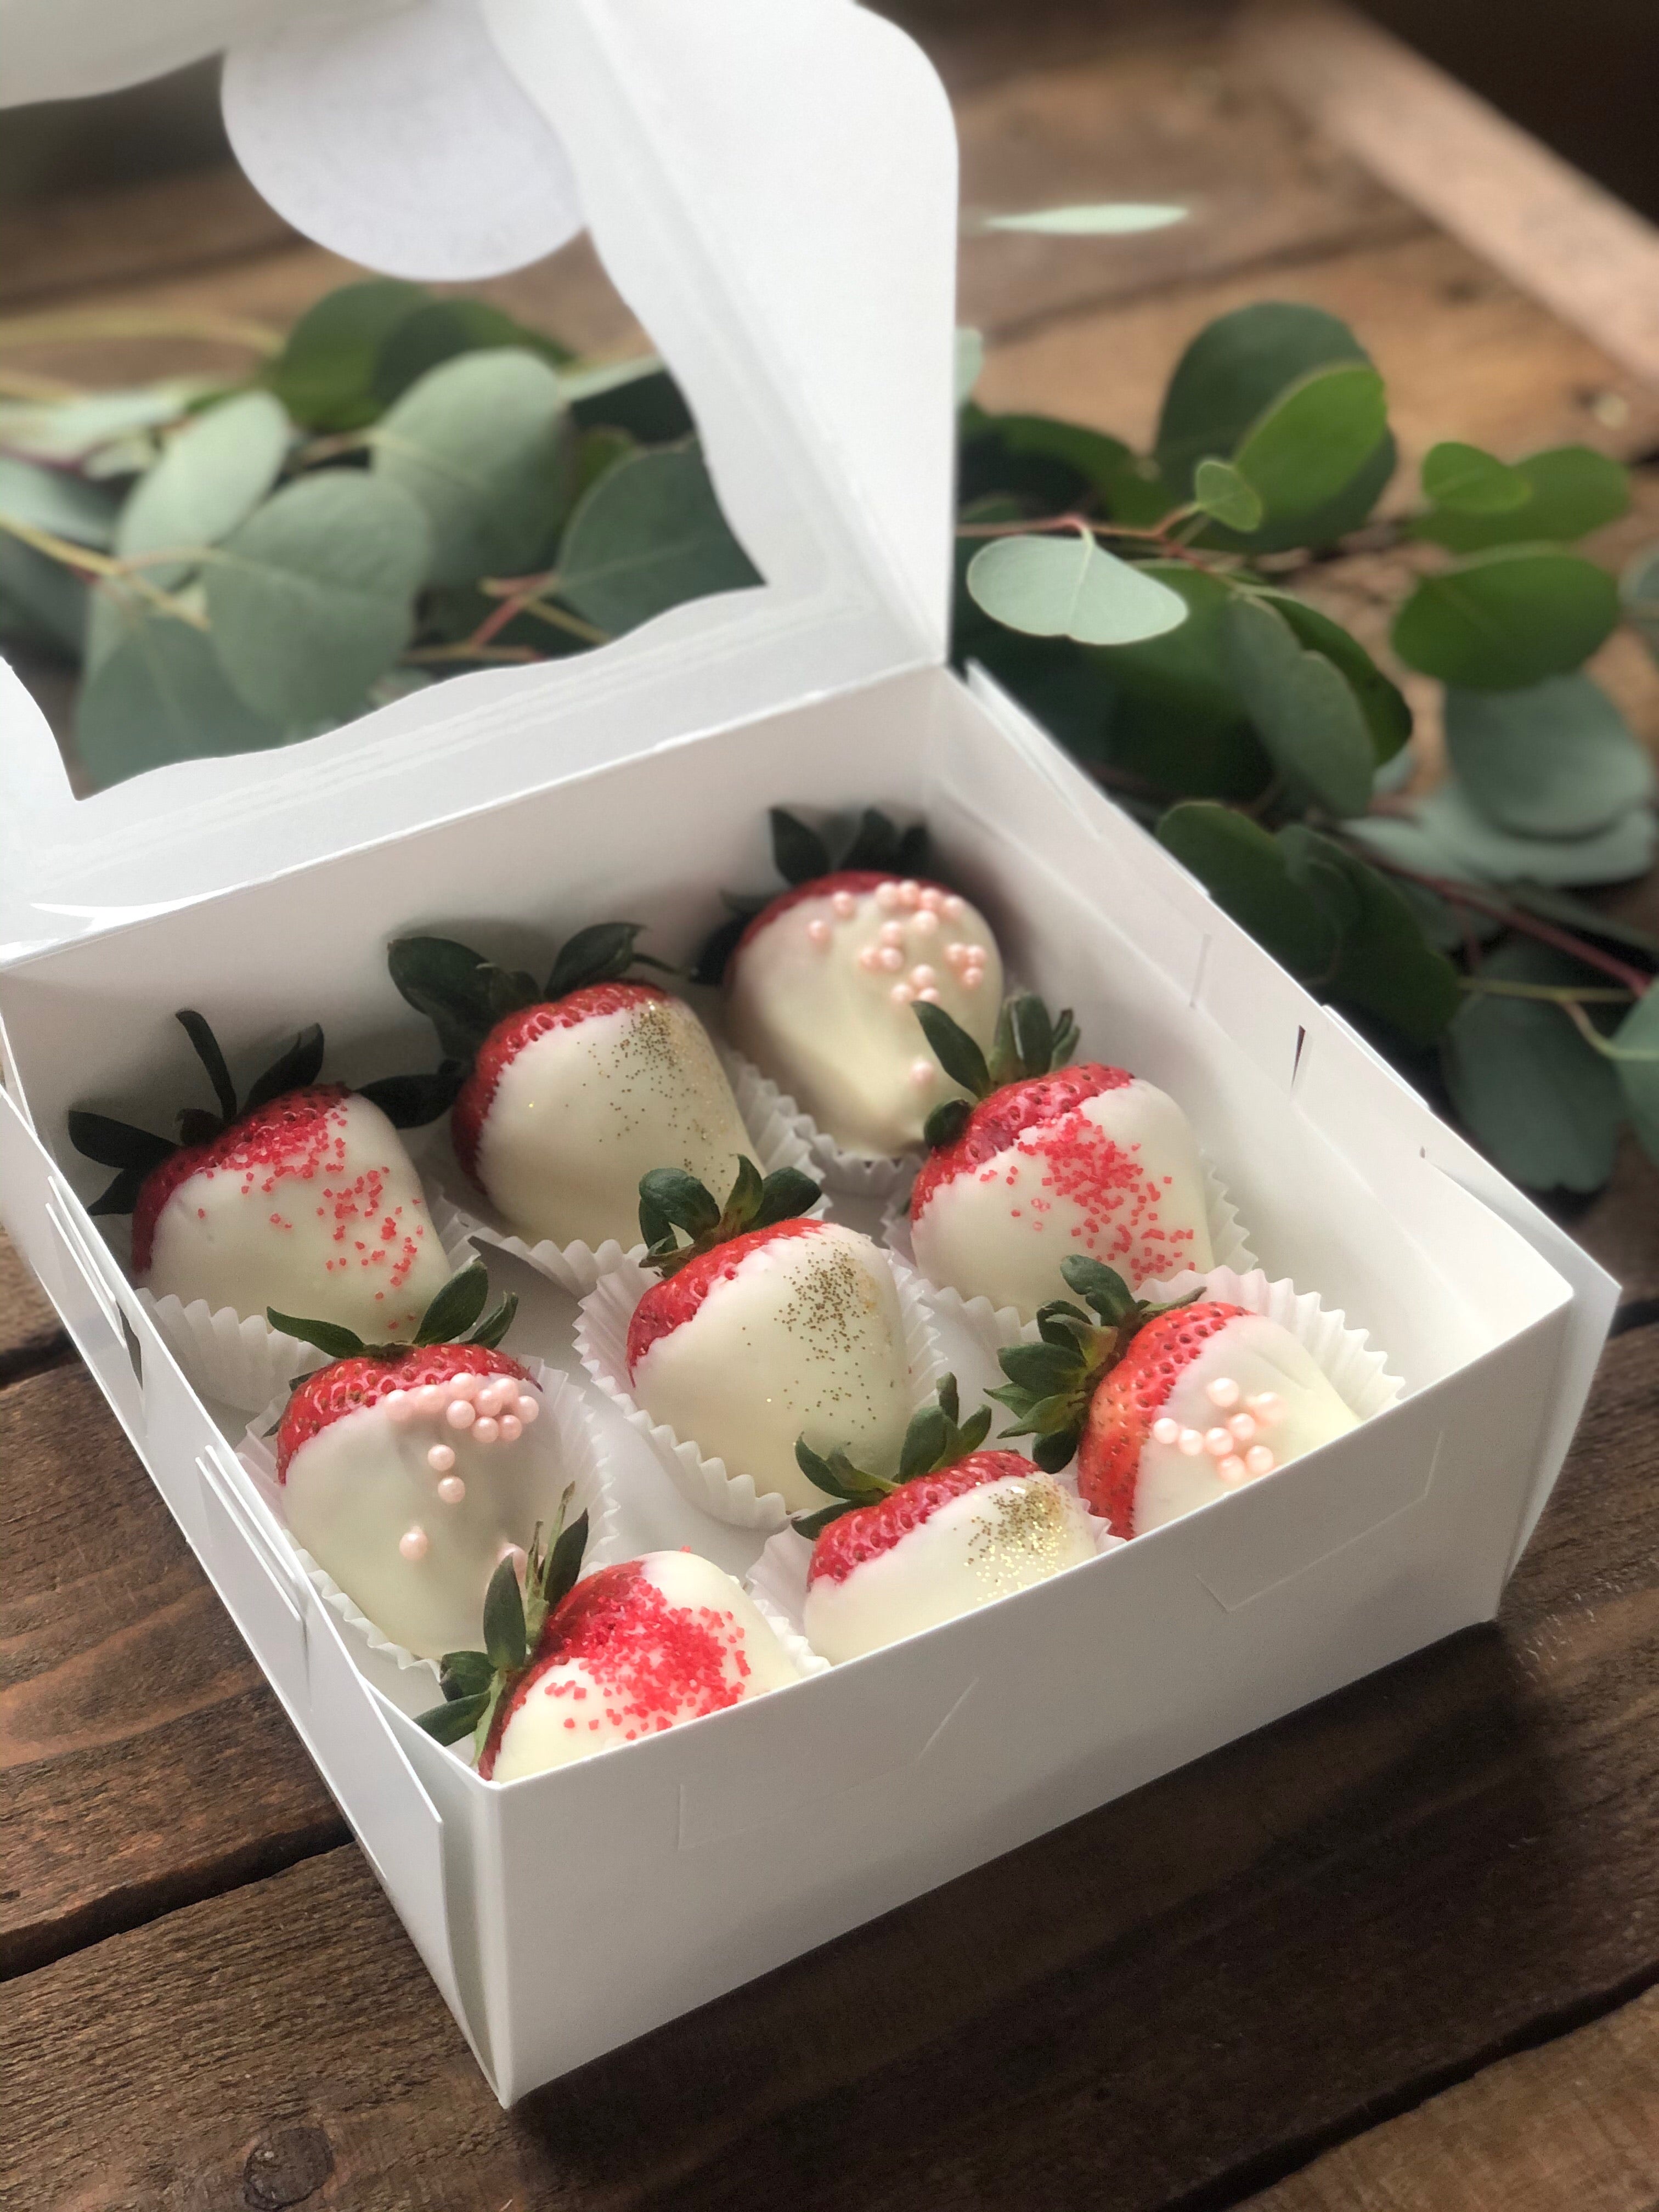 Bedford Candies - Bedford - Get your fresh dipped chocolate covered  strawberries 🍓 today!! Open till 3pm. *while supplies last